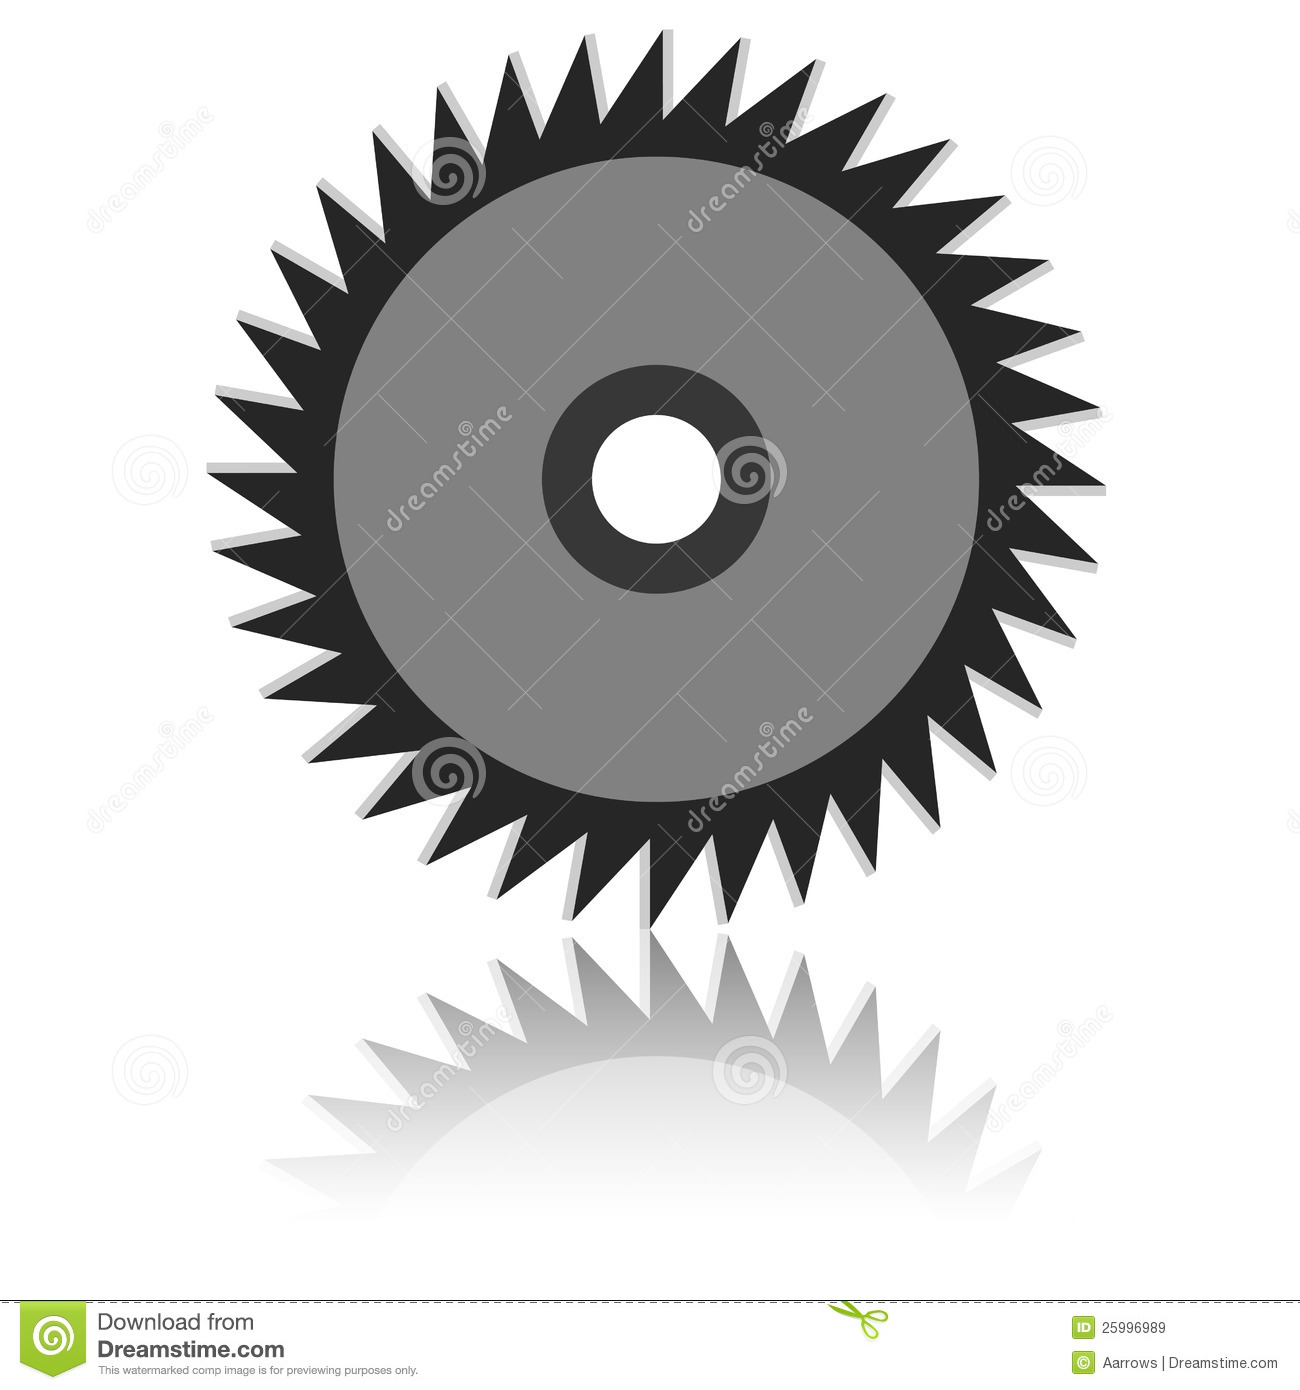 Saw Blade Clipart Black And White Circular Saw Blade On A White